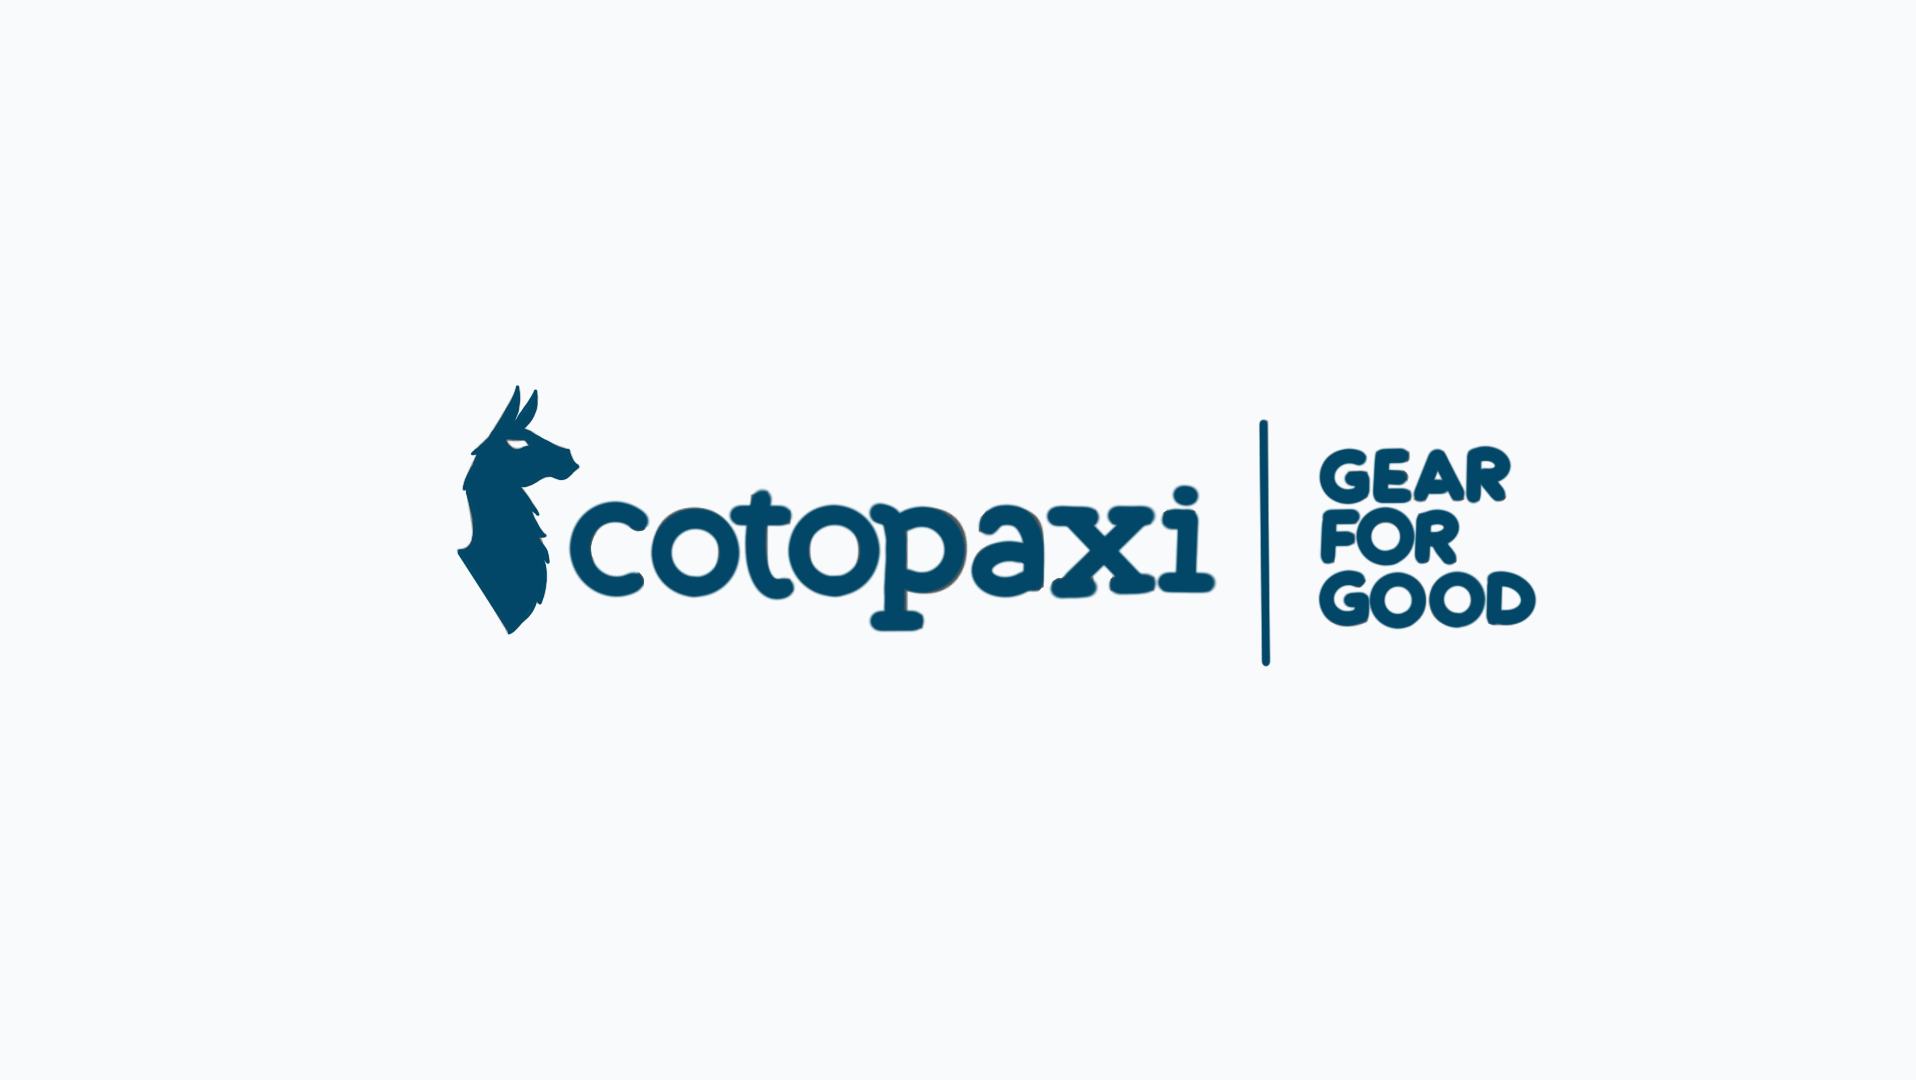 Max Stockdale - Cotopaxi Hiking Adventure